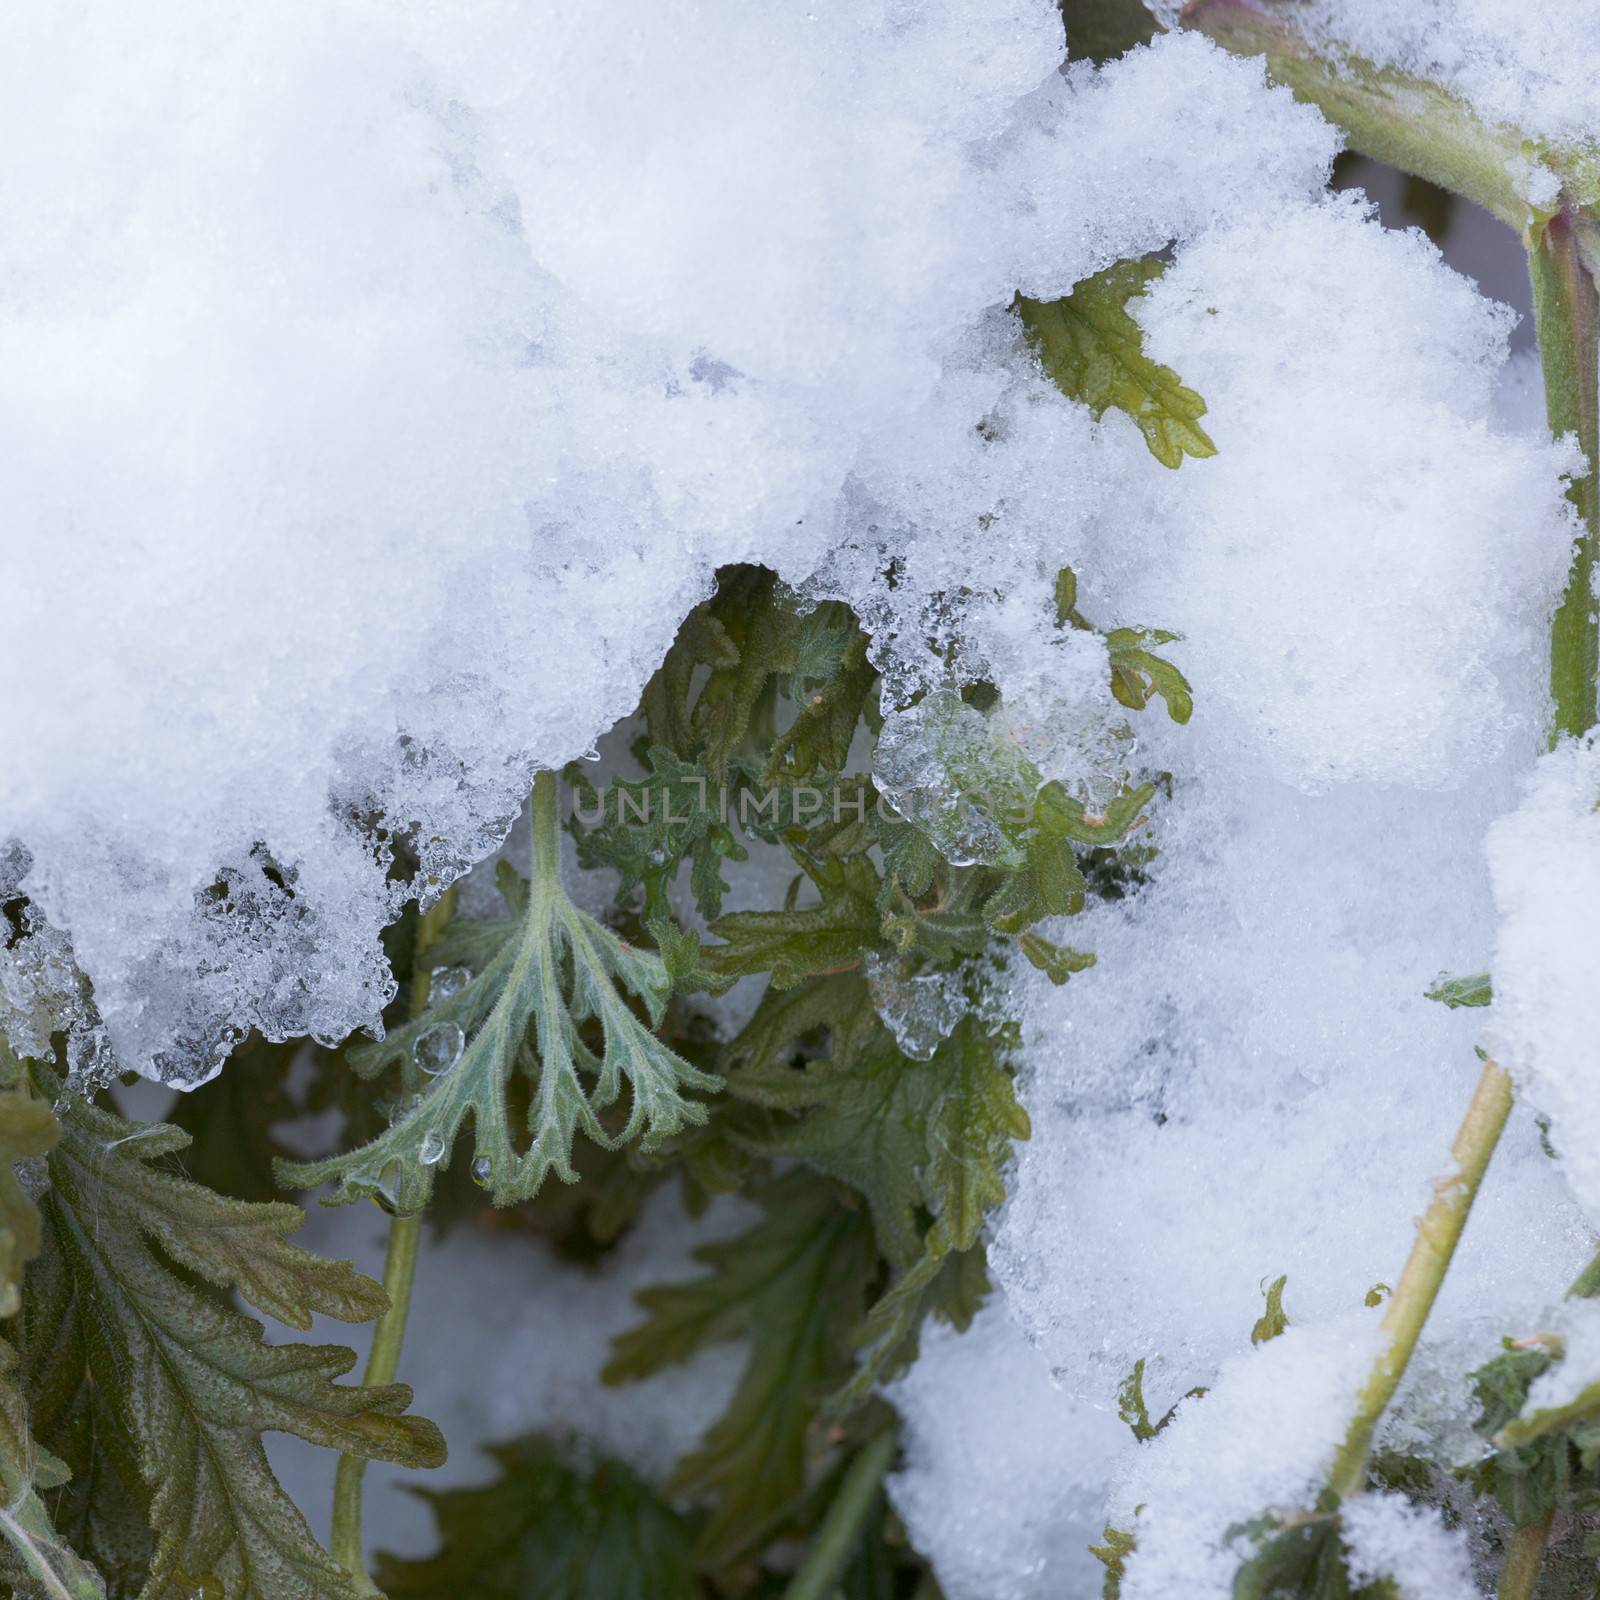 Freshly fallen fall autumn snow on still green but wilted plant leaves starts to thaw quickly